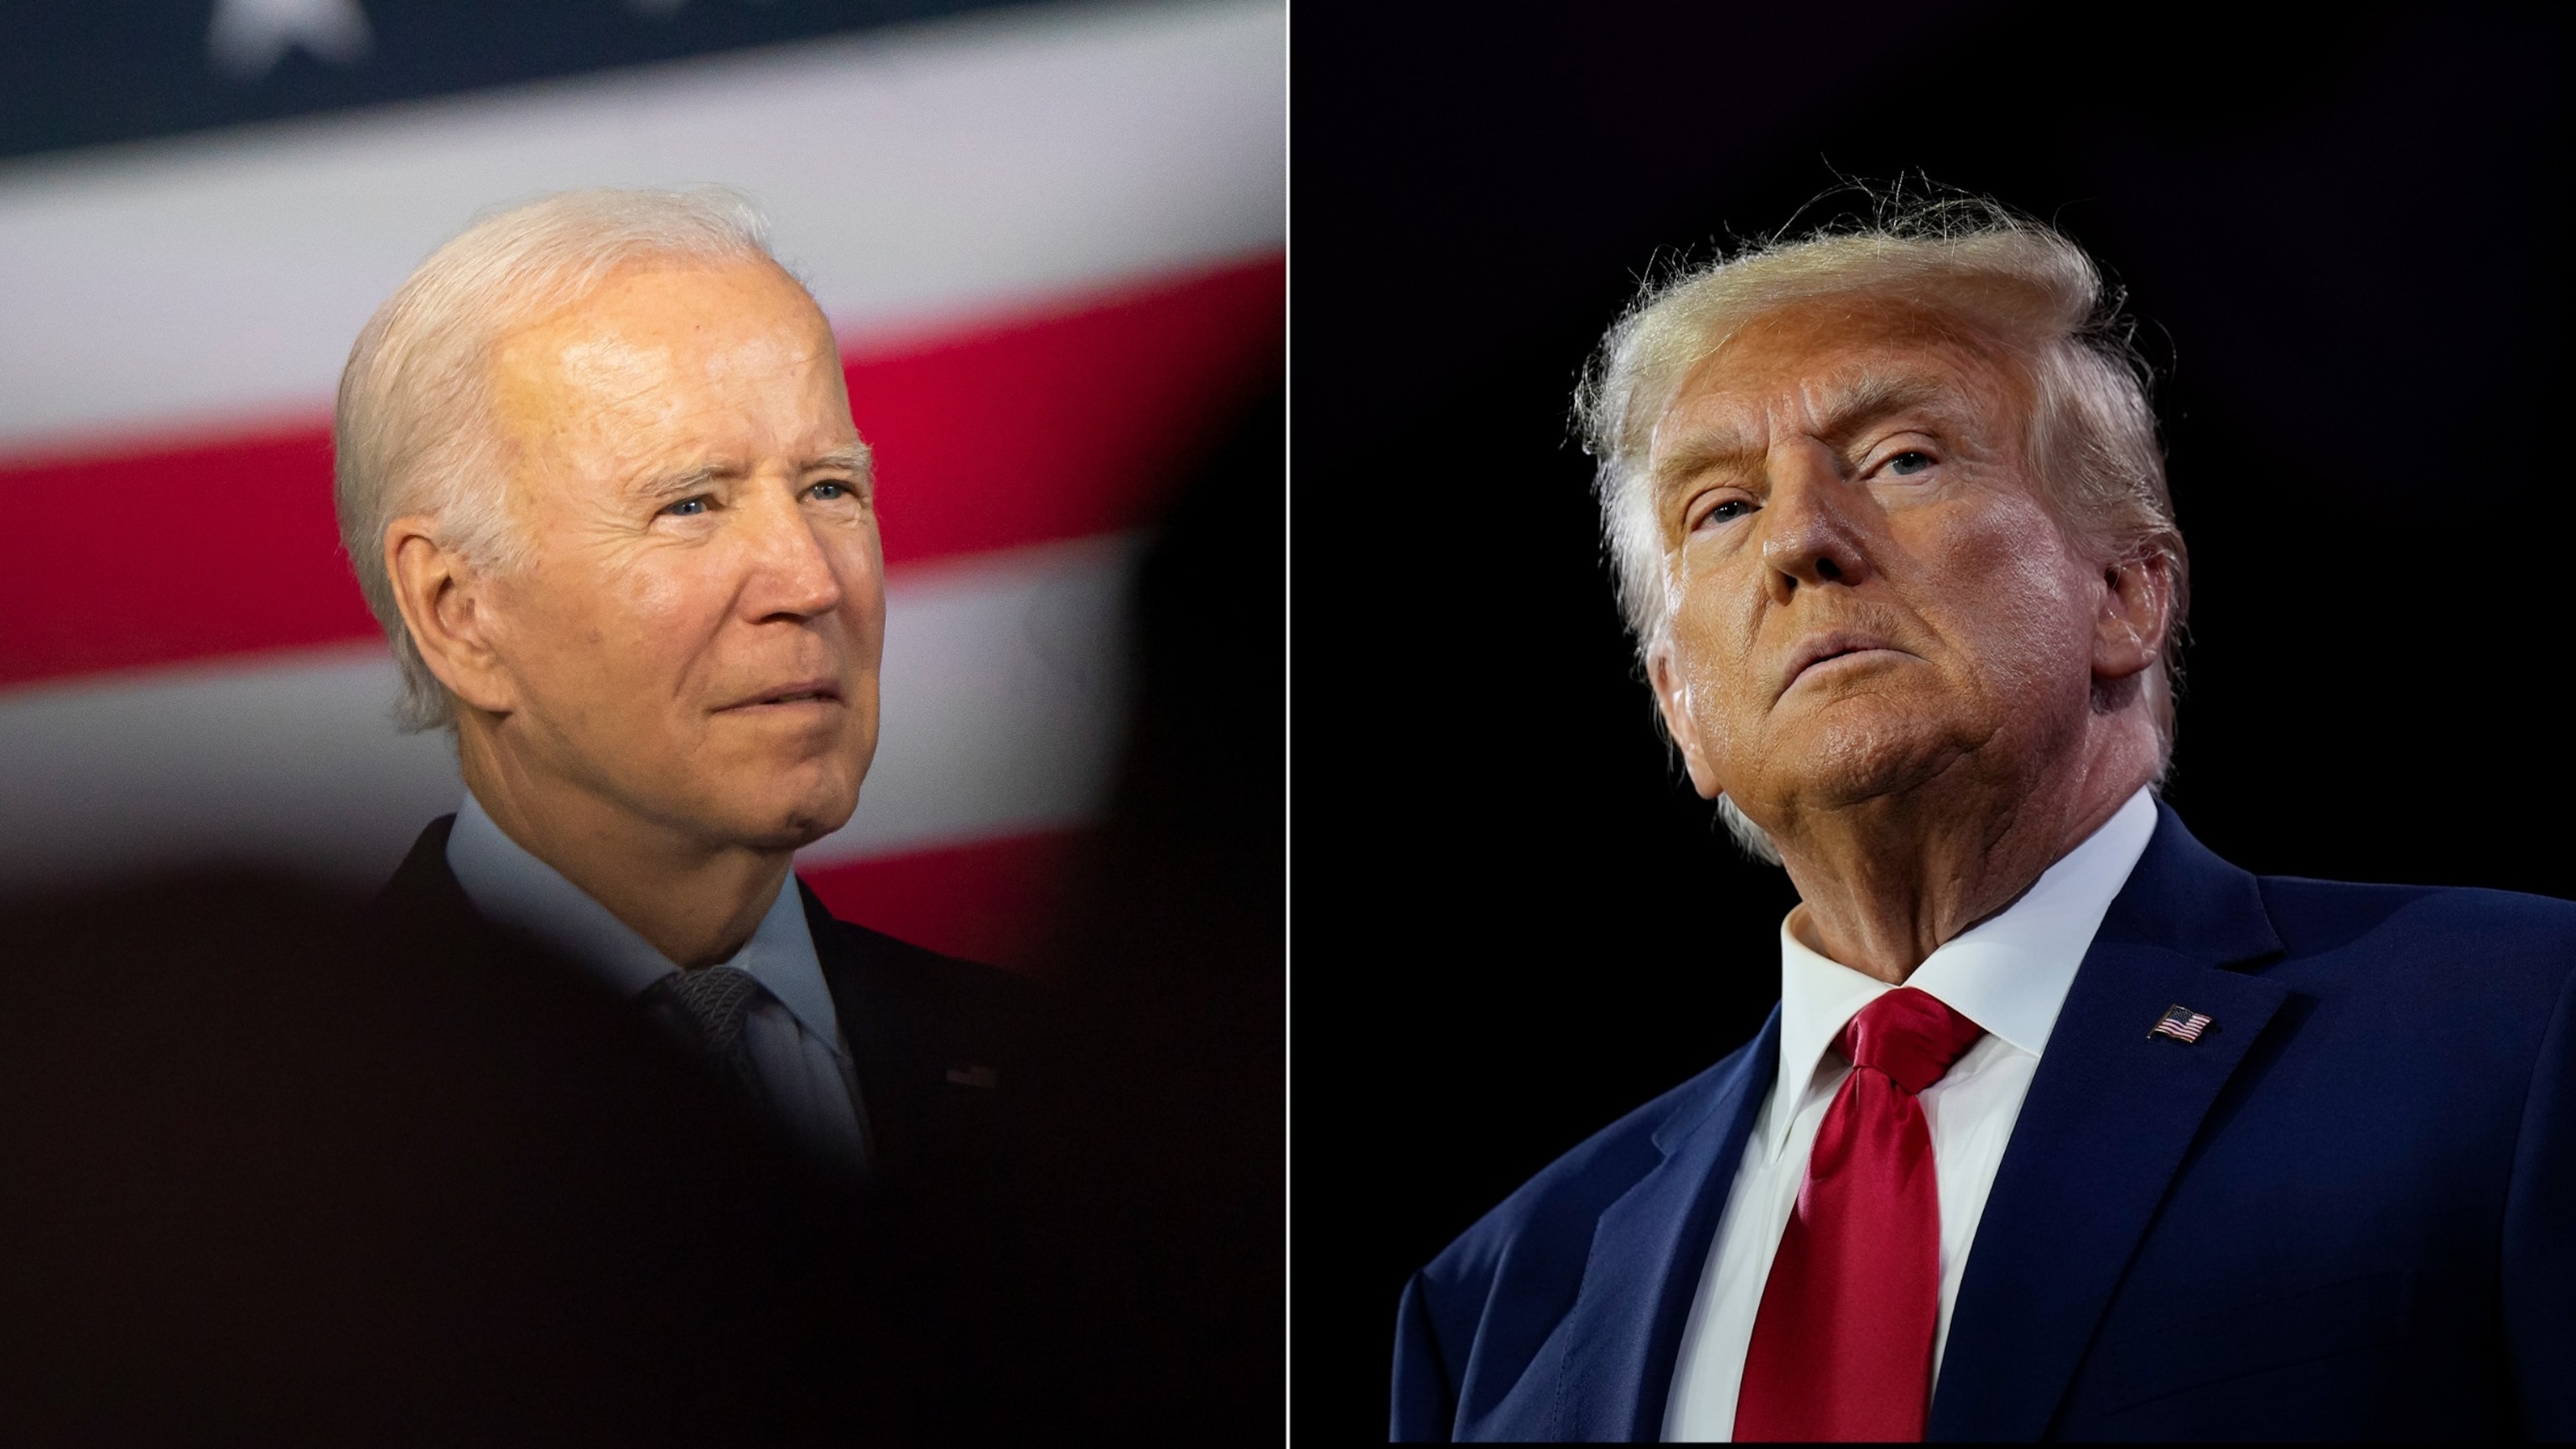 PHOTO: President Biden speaks at a campaign rally at Bowie State University on Nov. 7, 2022 in Bowie, Md., and Republican presidential candidate former President Trump at the Washington Hilton on June 24, 2023 in Washington, DC. 